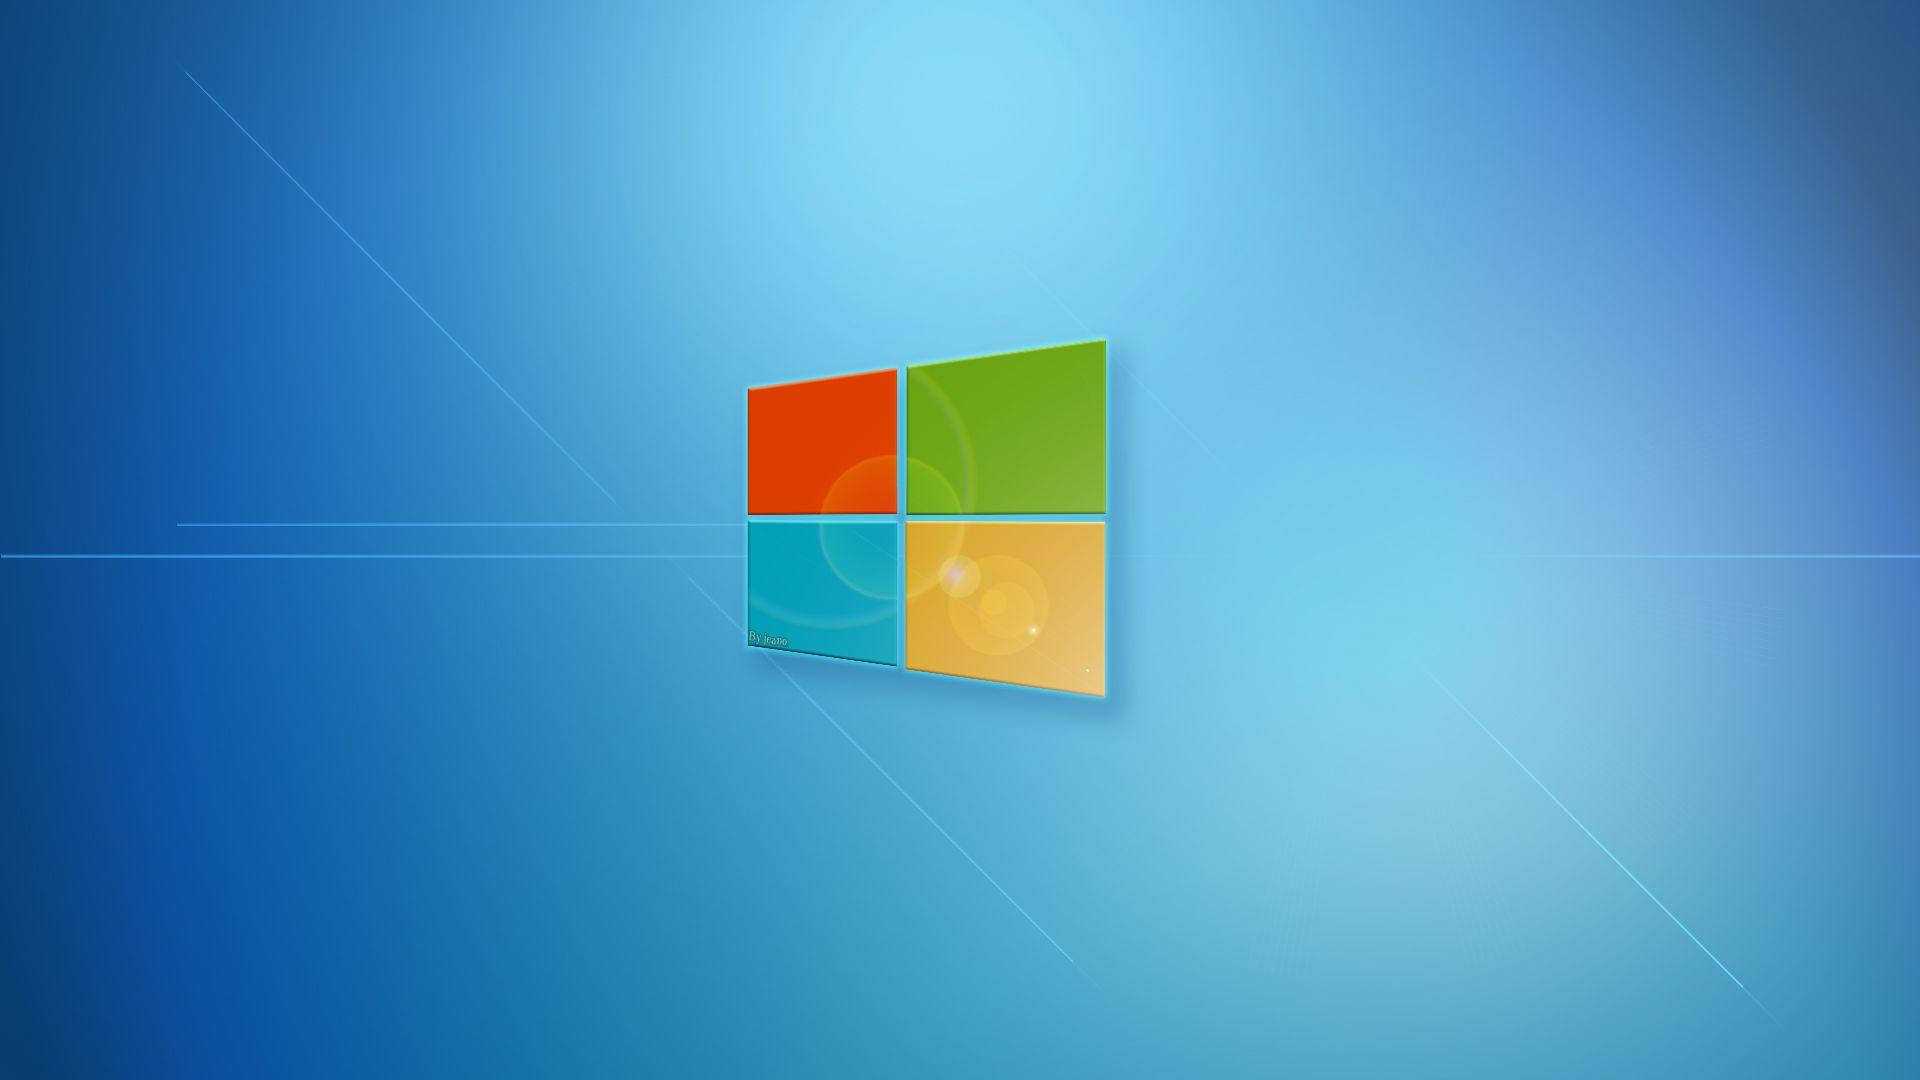 Windows 11 1920X1080 Wallpaper and Background Image